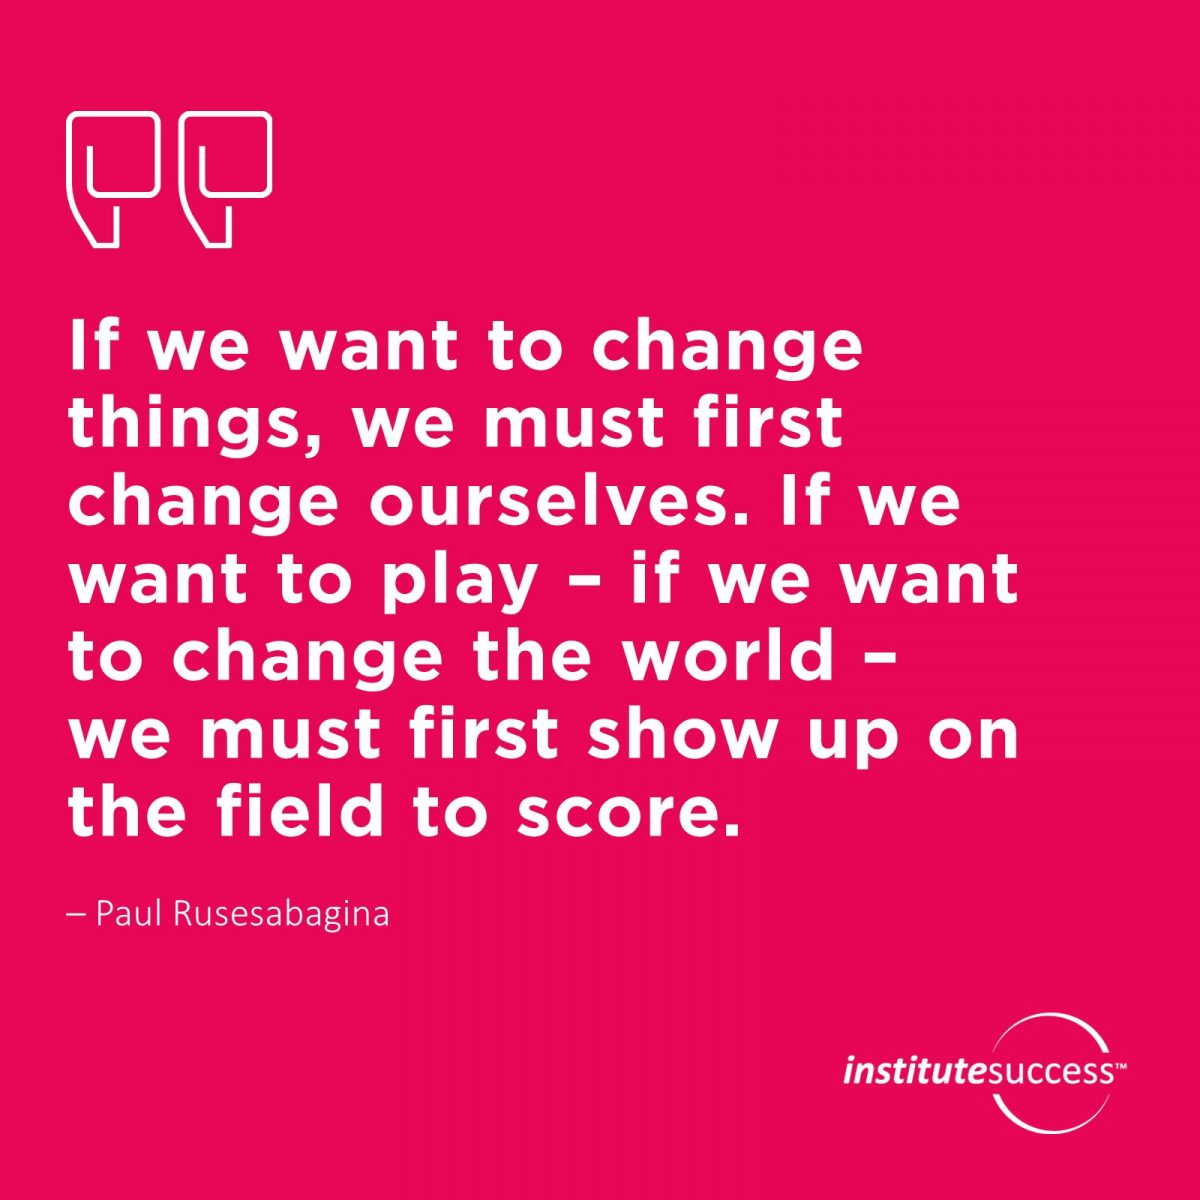 If we want to change things, we must first change ourselves. If we want to play – if we want to change the world – we must first show up on the field to score.  – Paul Rusesabagina